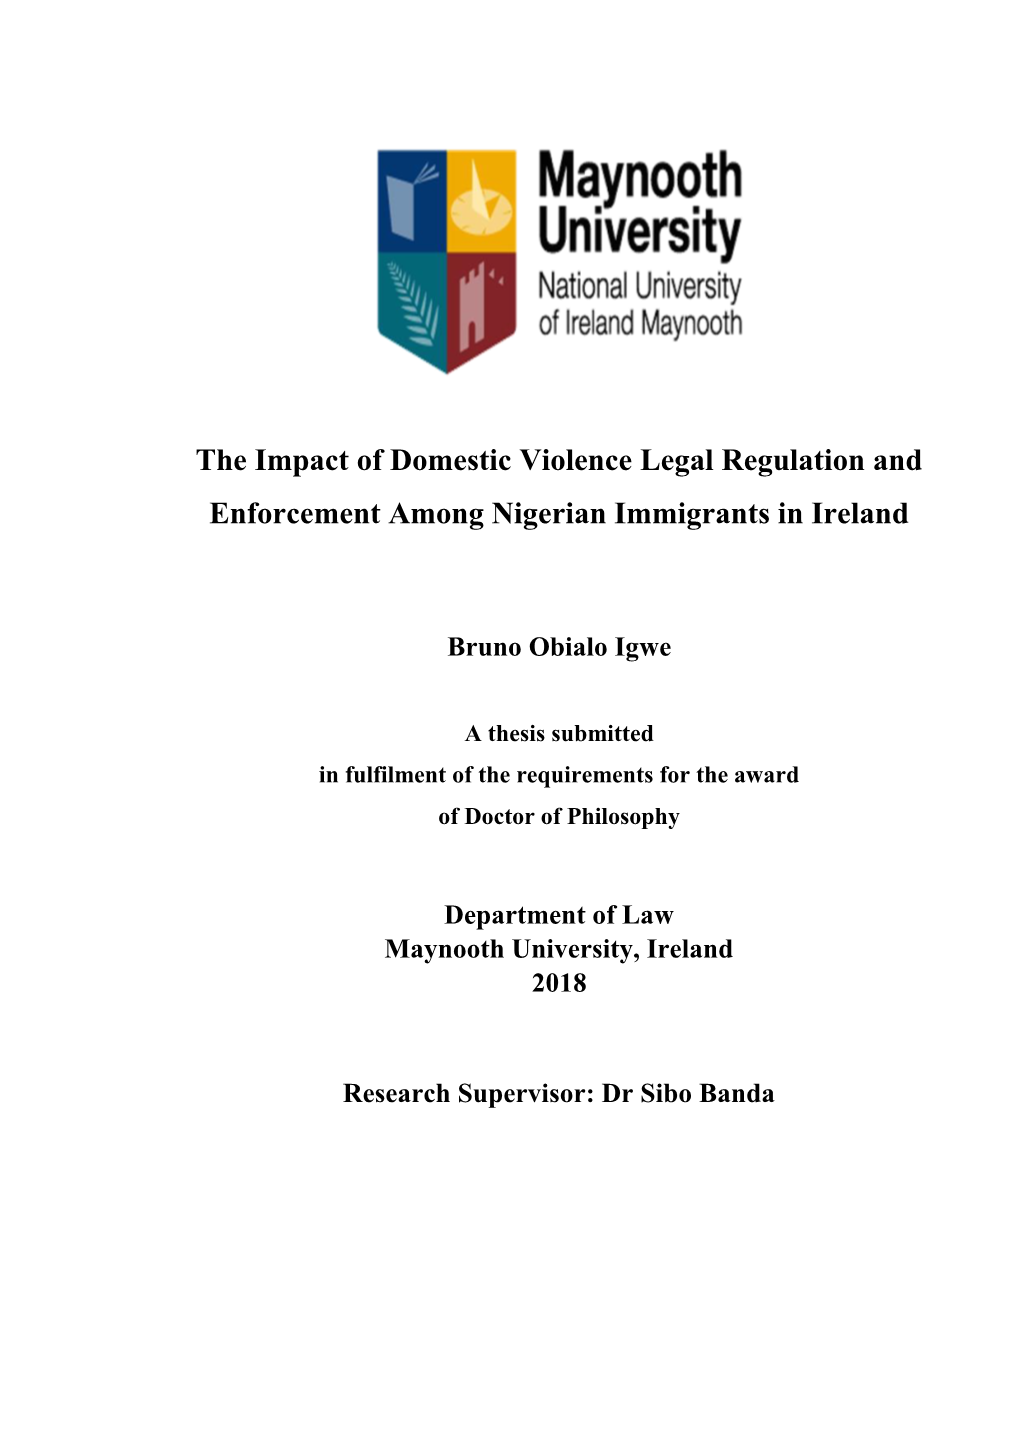 The Impact of Domestic Violence Legal Regulation and Enforcement Among Nigerian Immigrants in Ireland